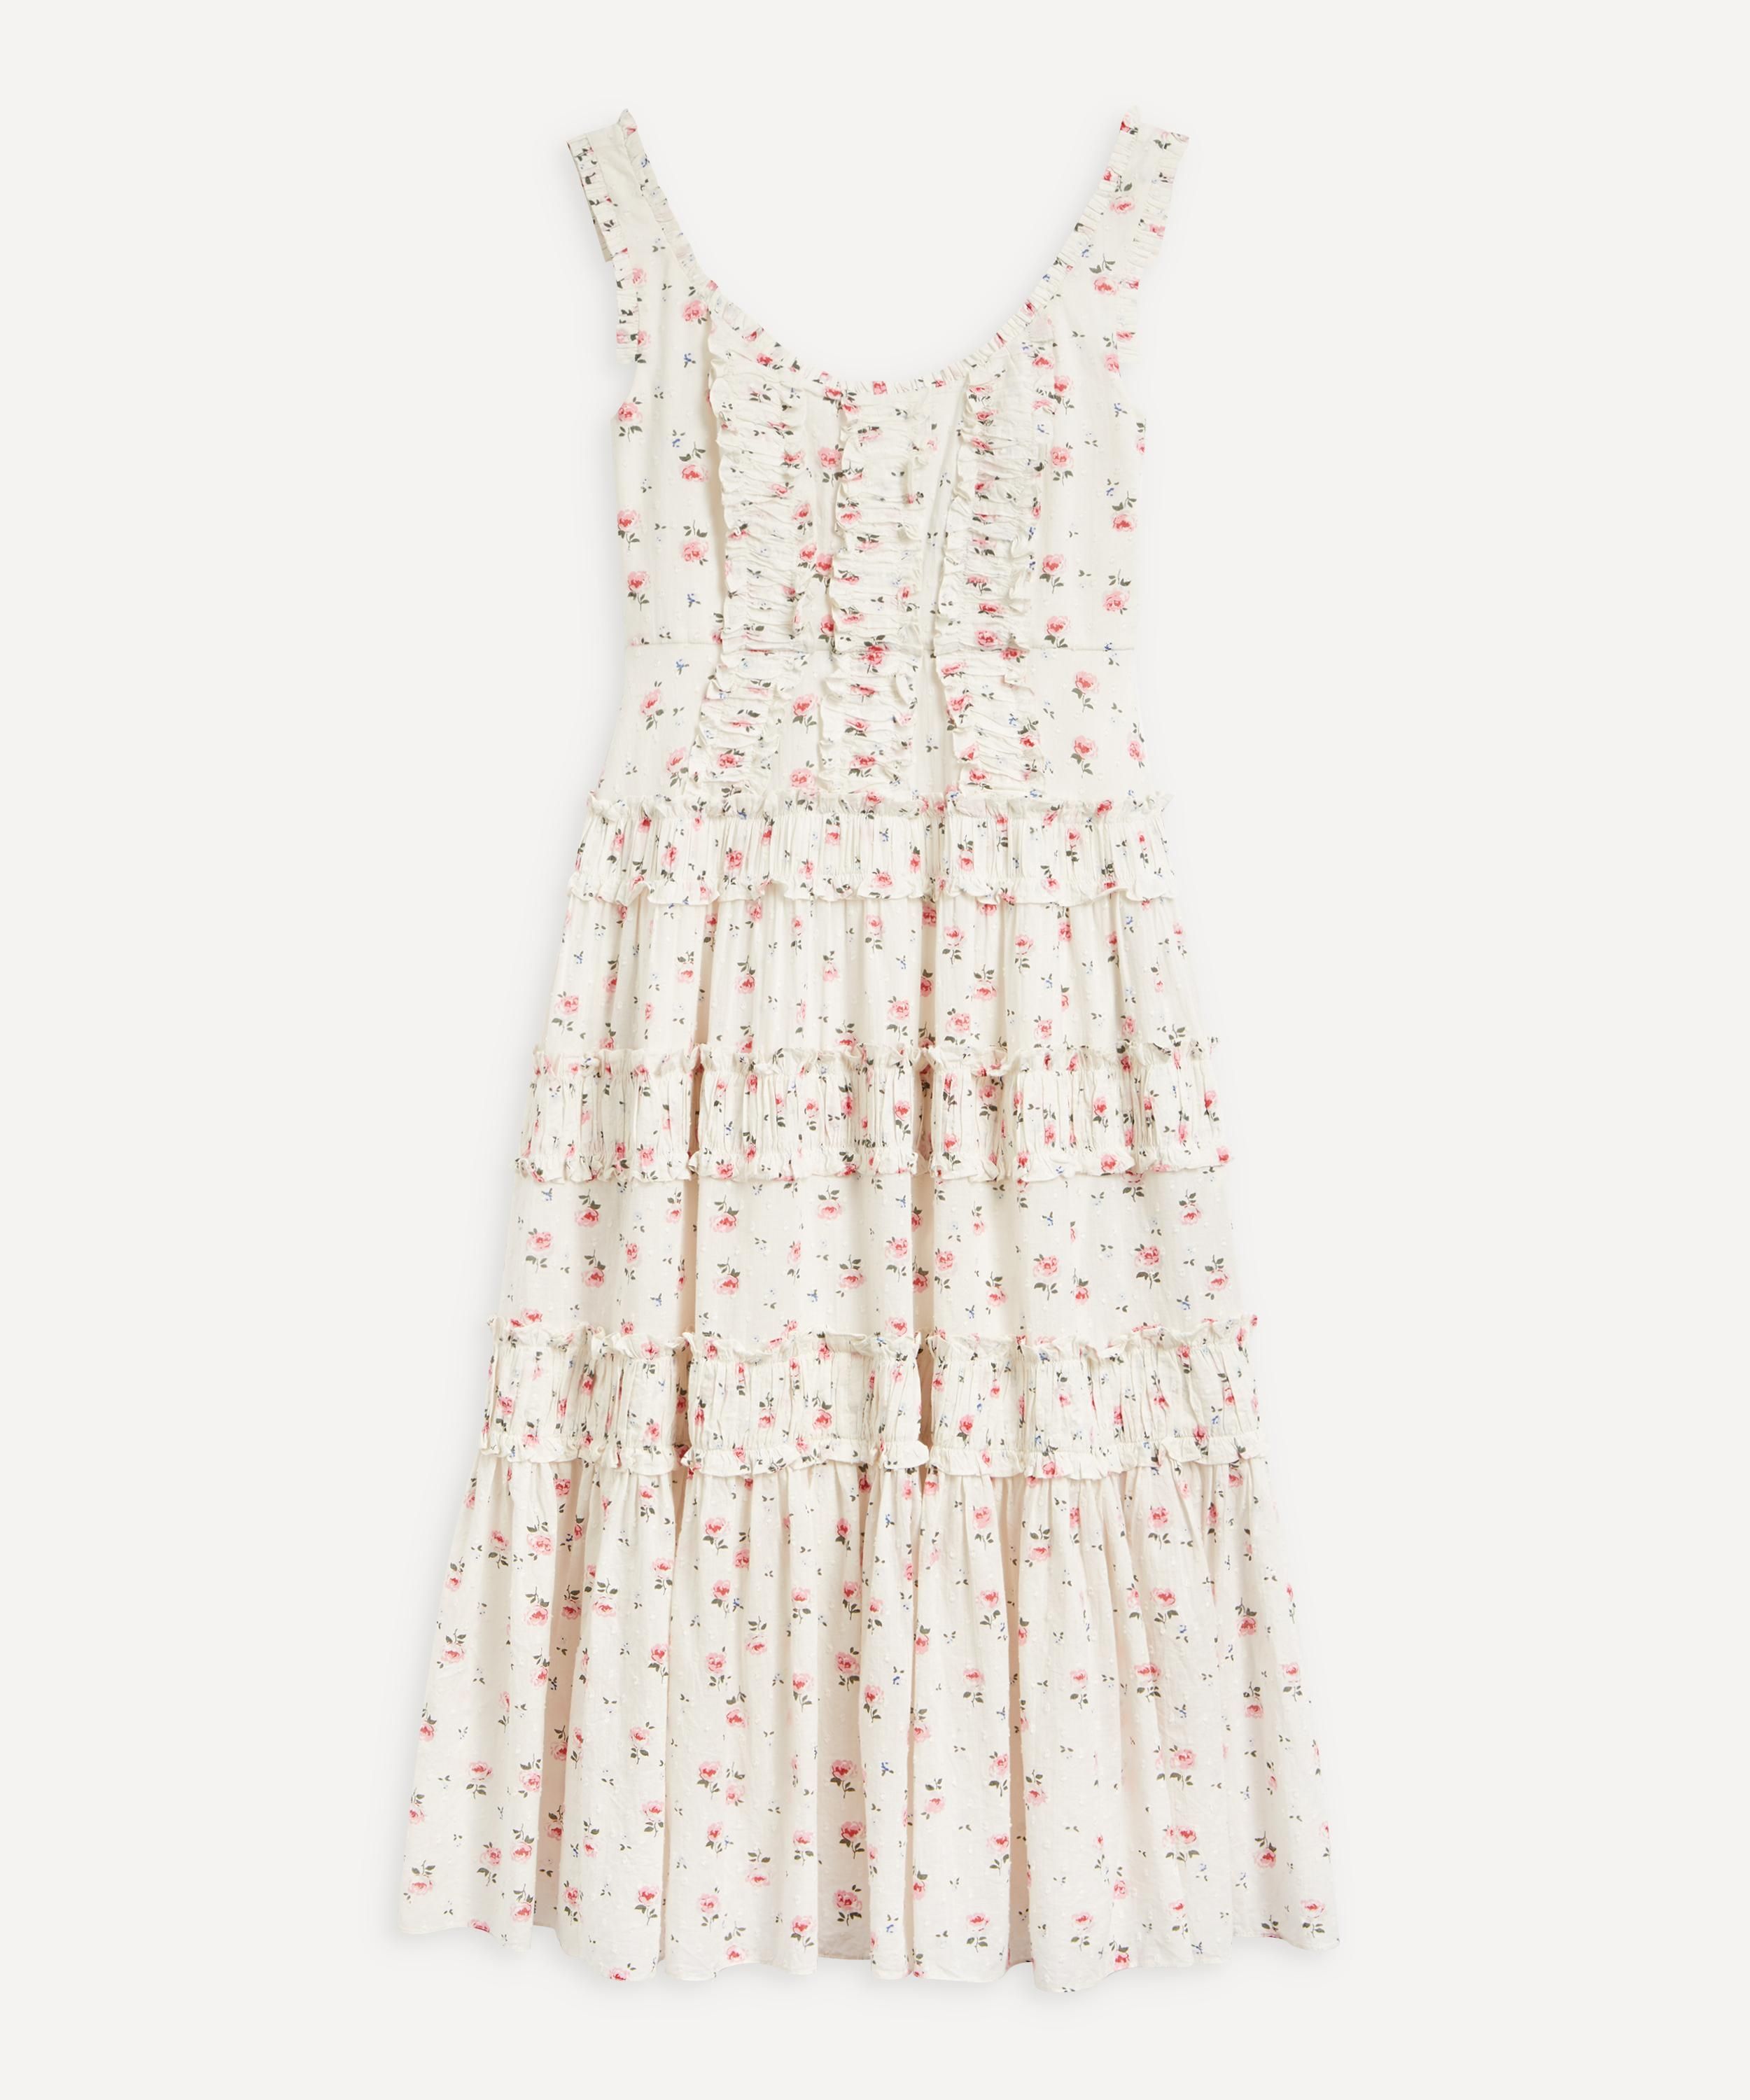 33 Wedding Guest Dresses We’re Eyeing Up for 2021